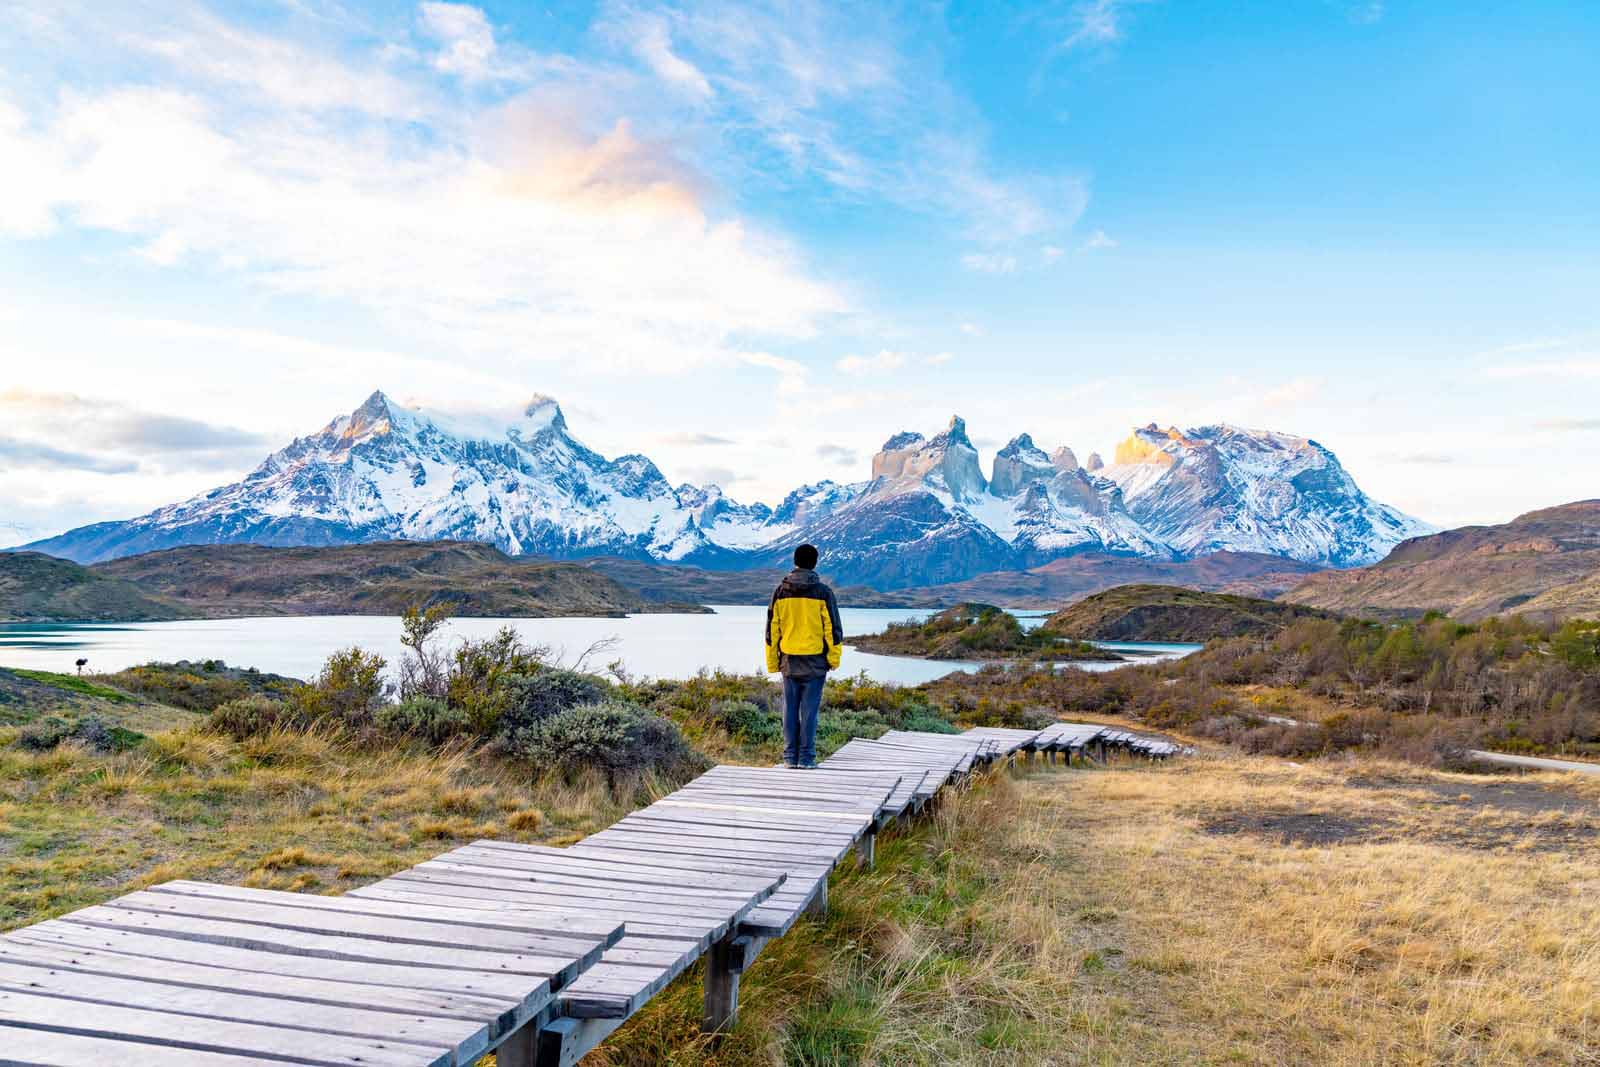 Hiking in Torres del Paine National Park